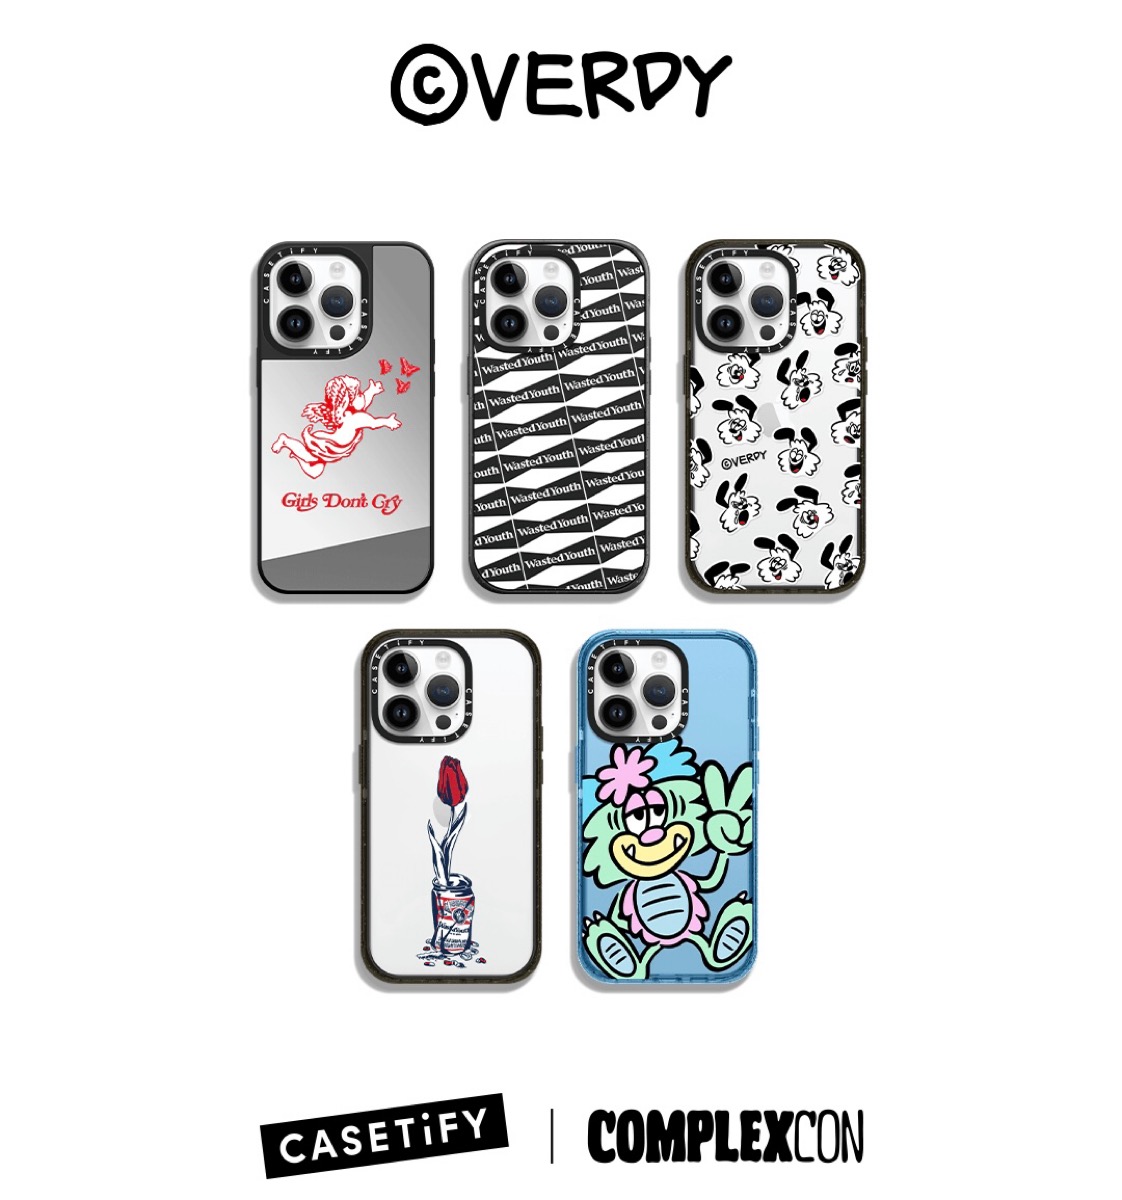 VERDY Girls Don't Cry & Wasted Youth × CASETiFY コラボコレクション 